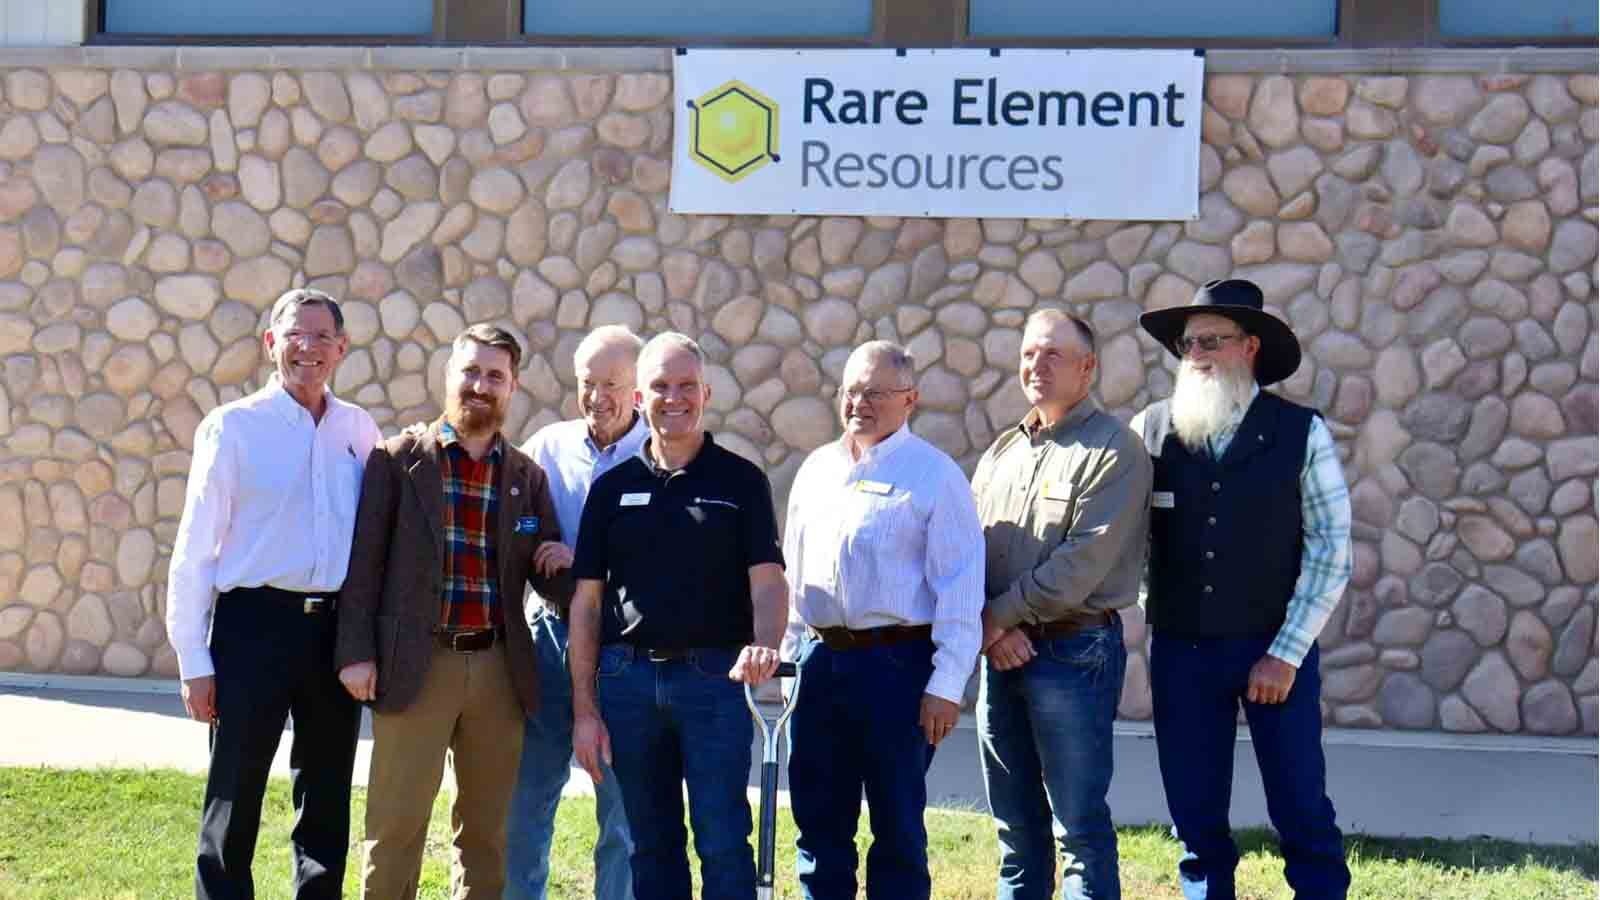 Rare Element Resources CEO Brent Berg, center left, with Wyoming state, national and local officials at Monday's groundbreaking for the company's rare earths demonstration plant in Upton, Wyoming.